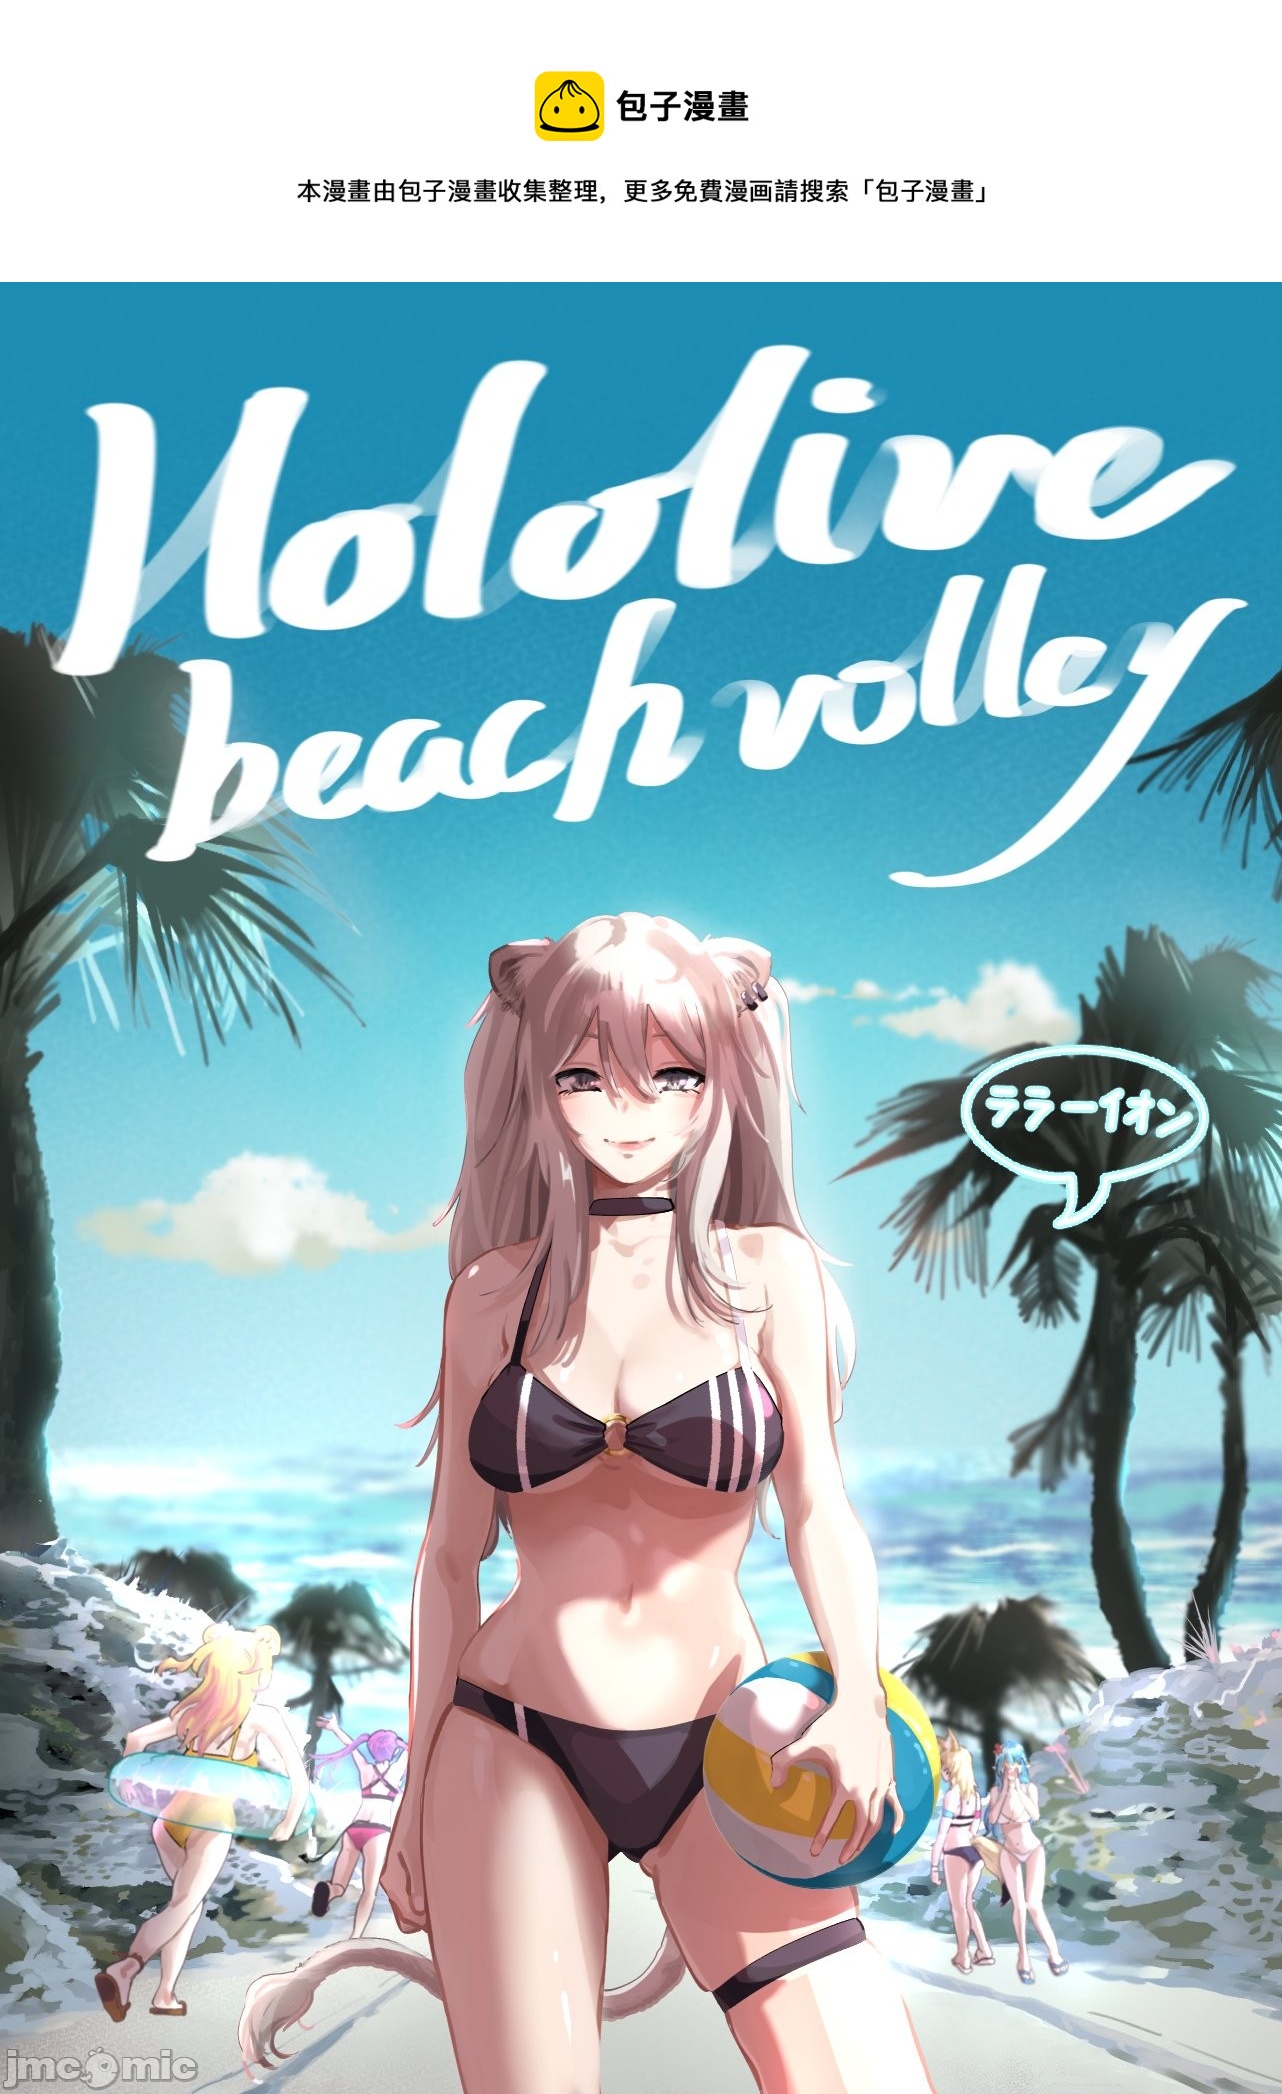 Hololive Beach Volley - 短篇 - 1